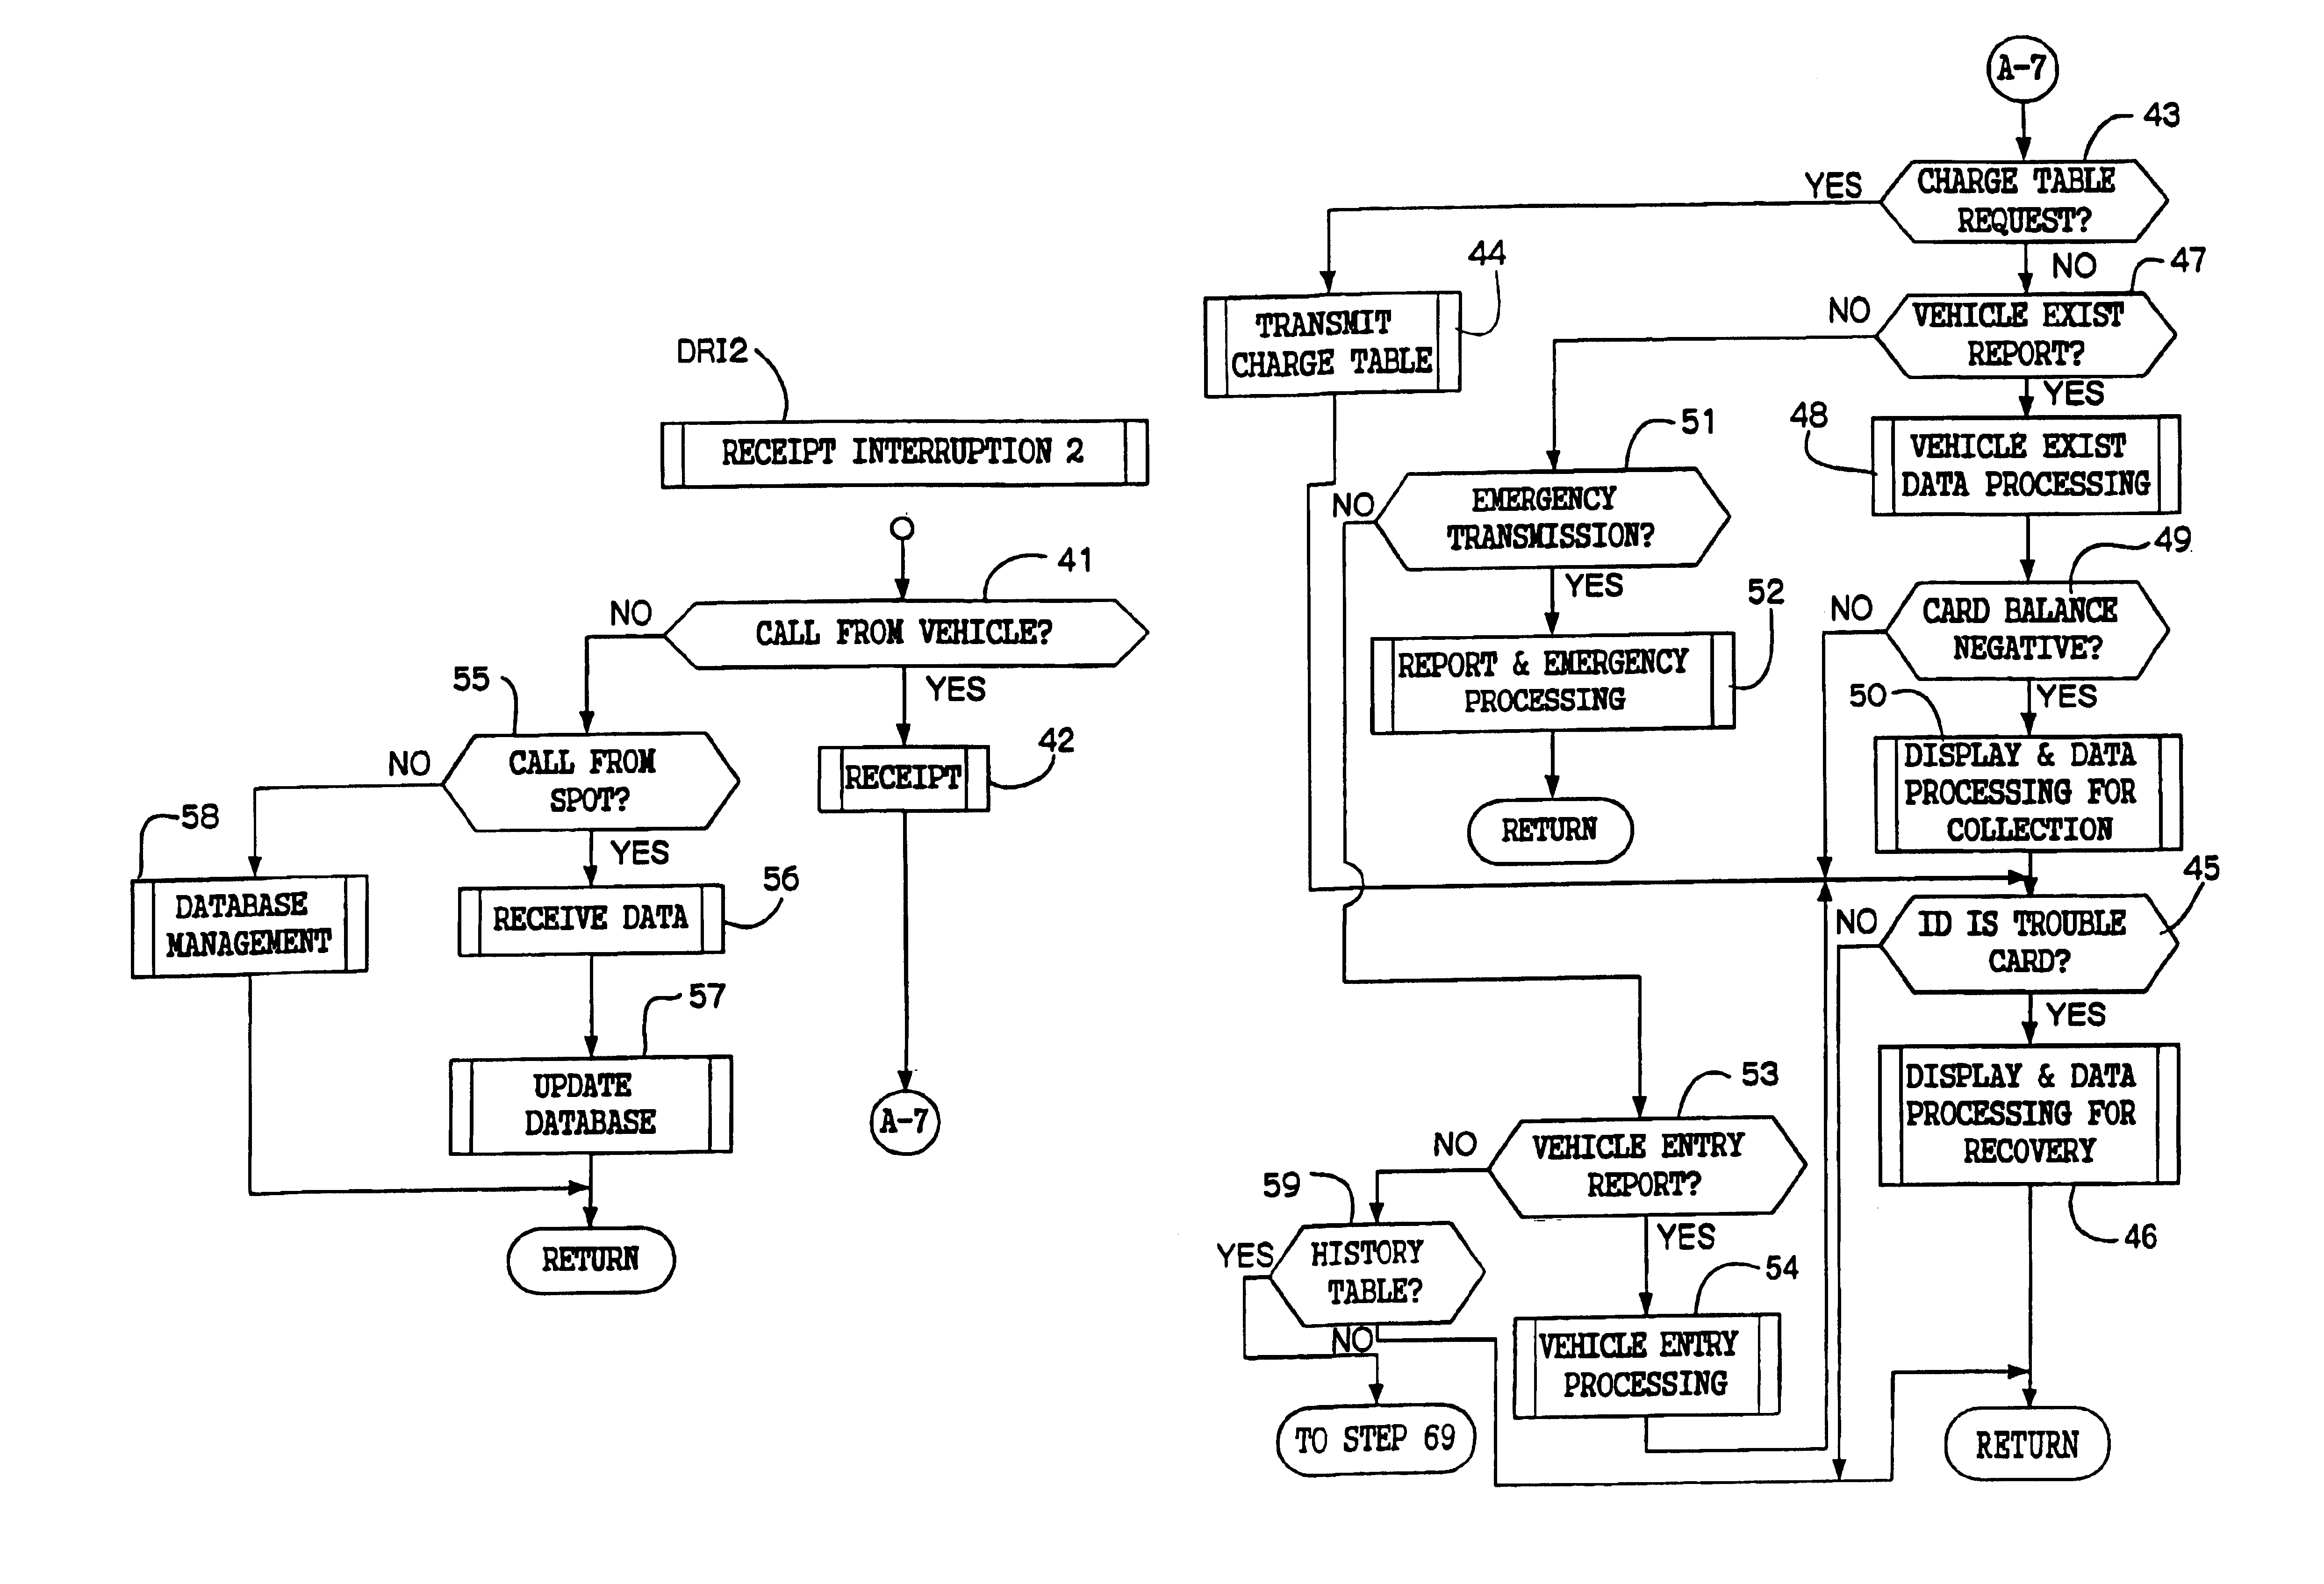 Charging system which carries out data processing for fee payment